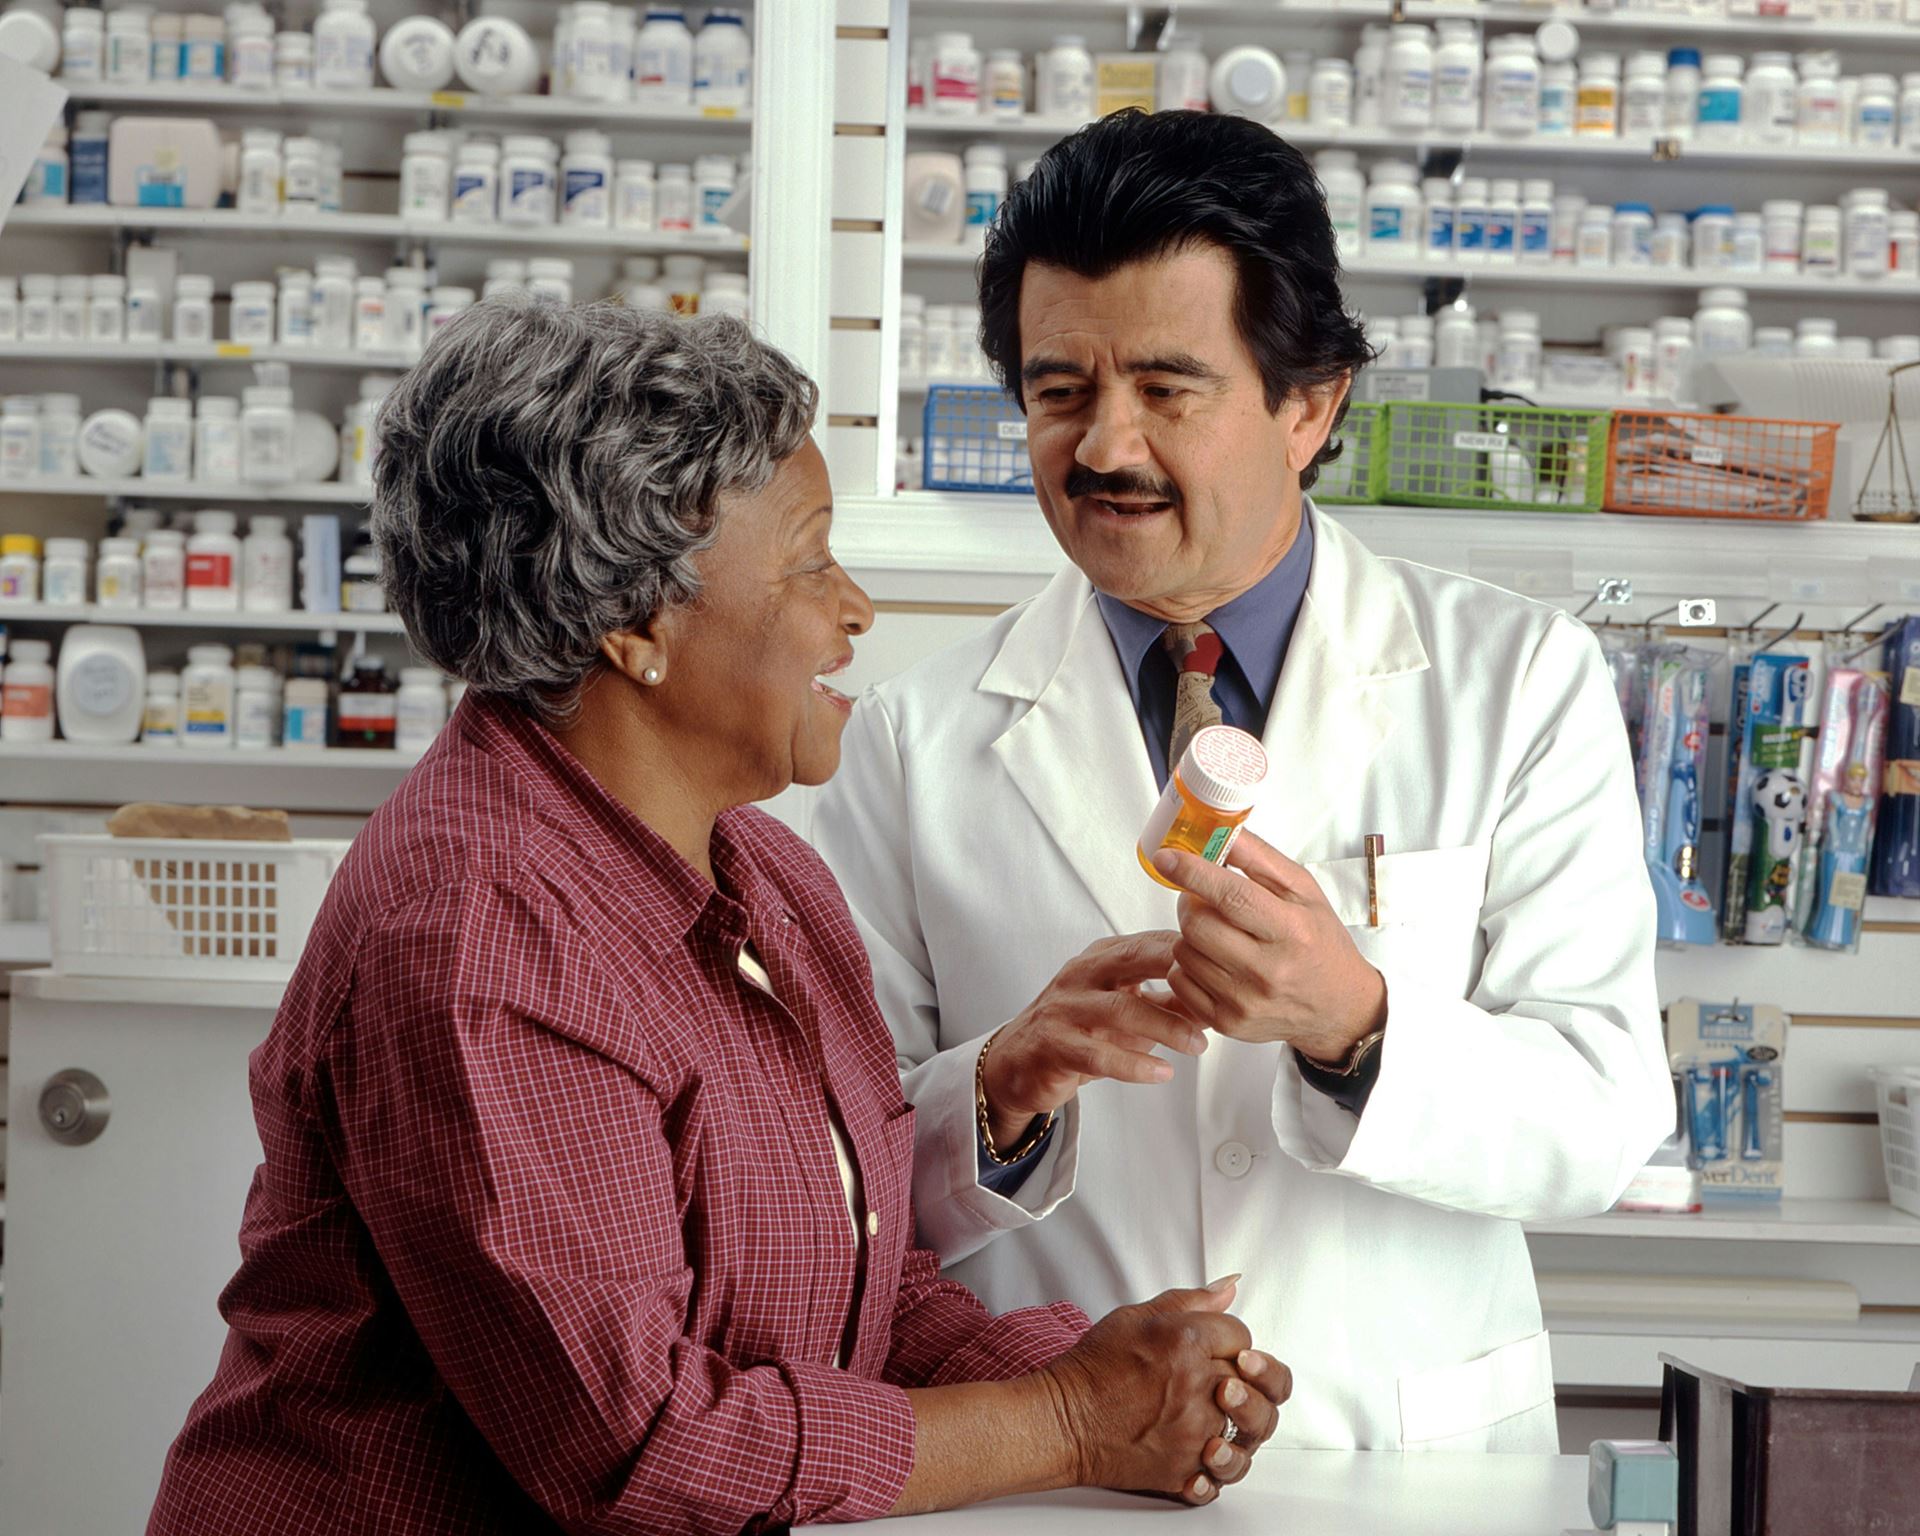 patient and pharmacist